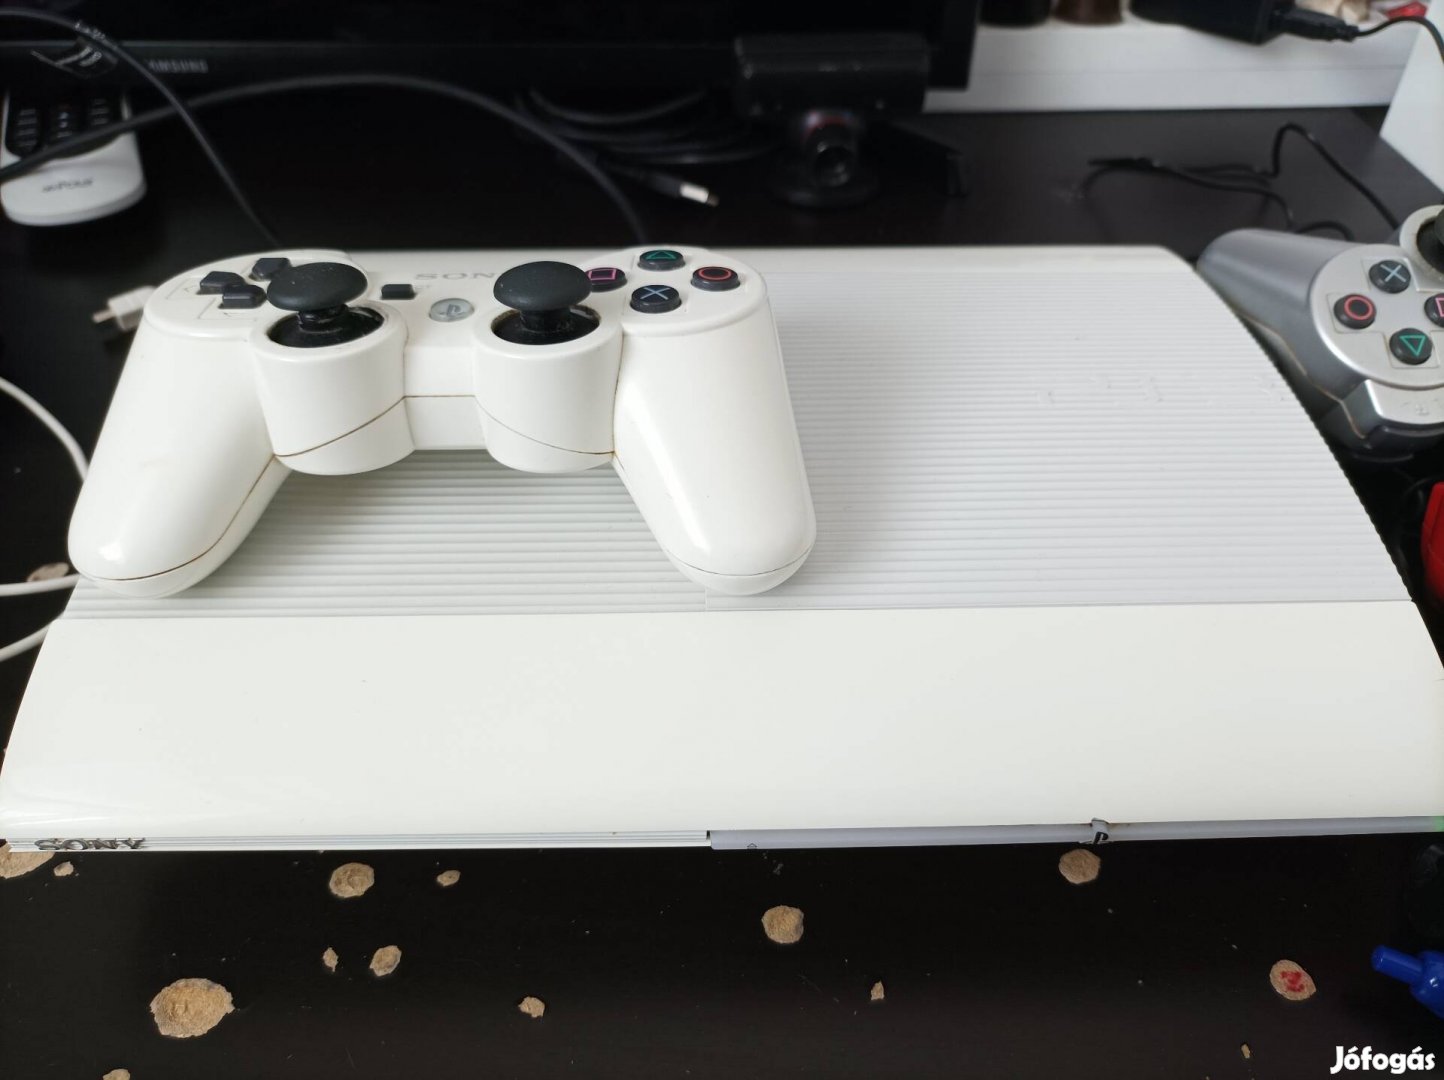 PS3 superslim 12 GB white